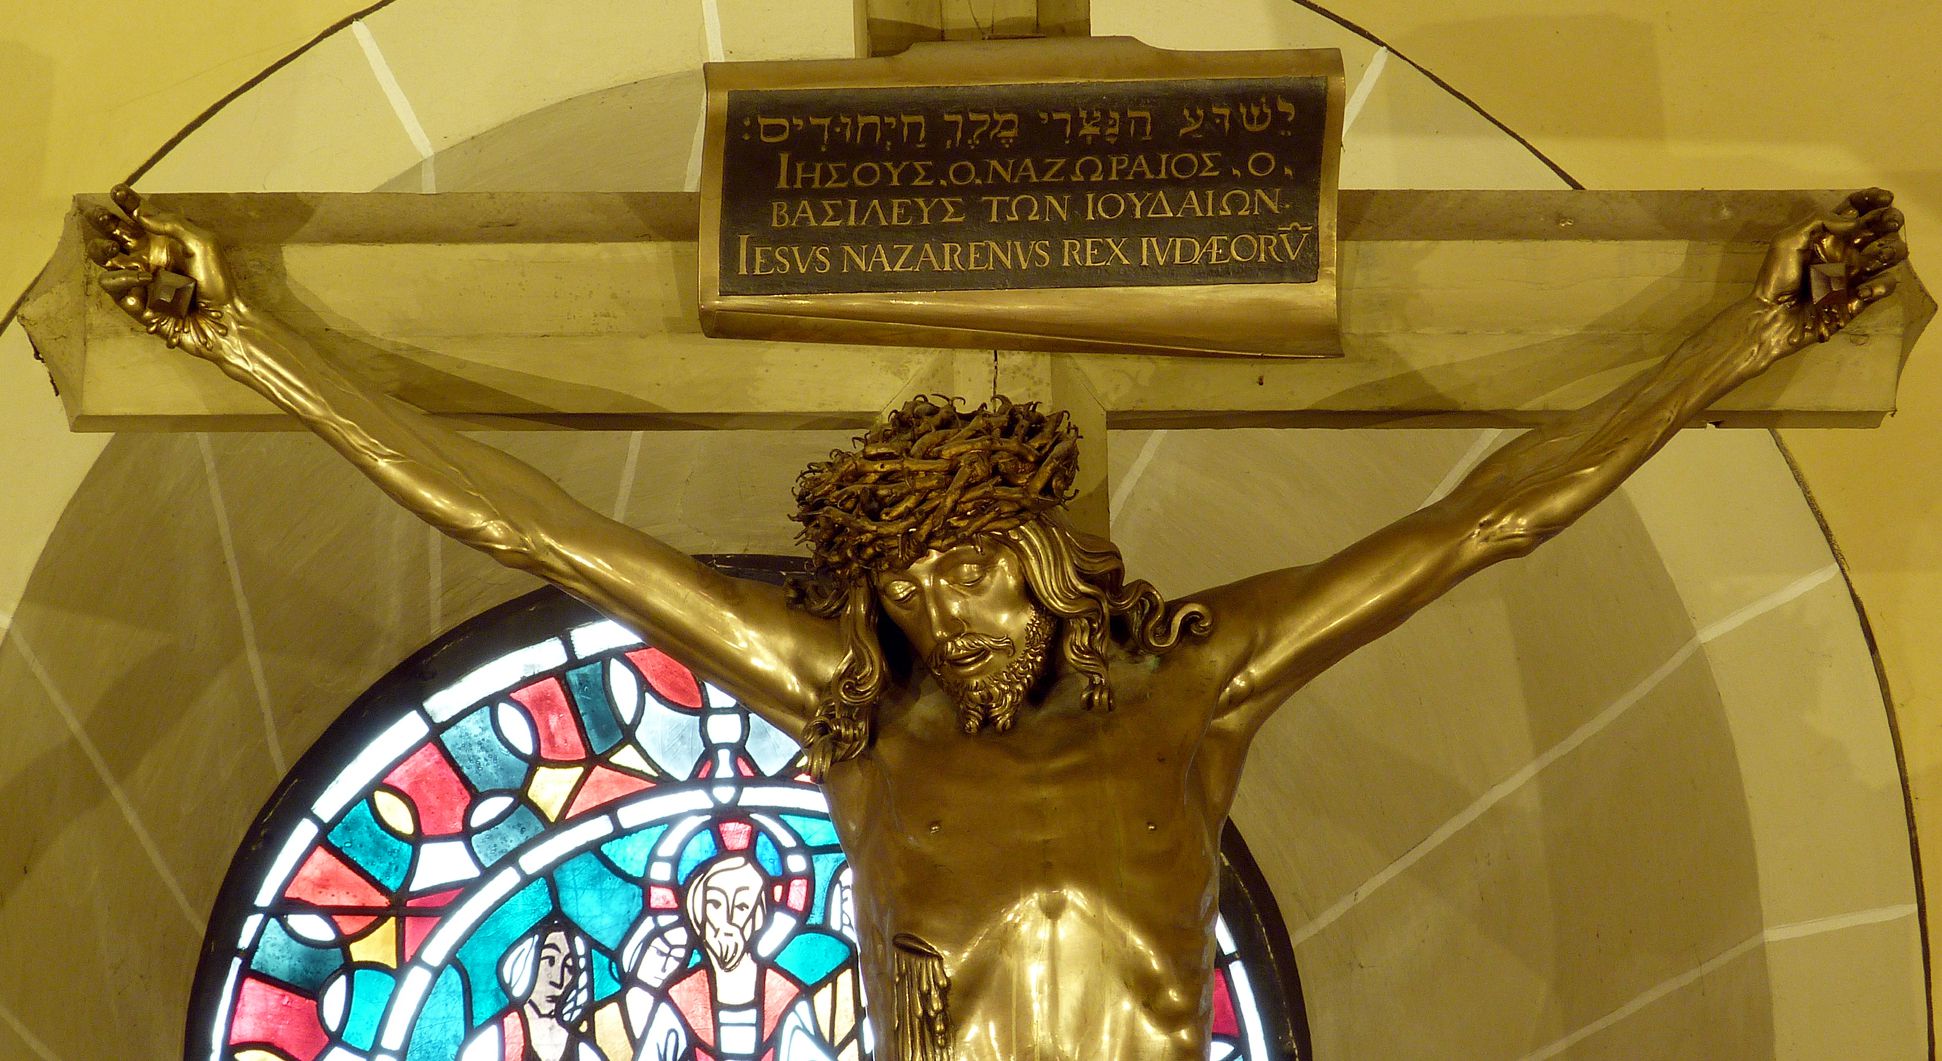 Crucifix Upper part of the body with inscription plate